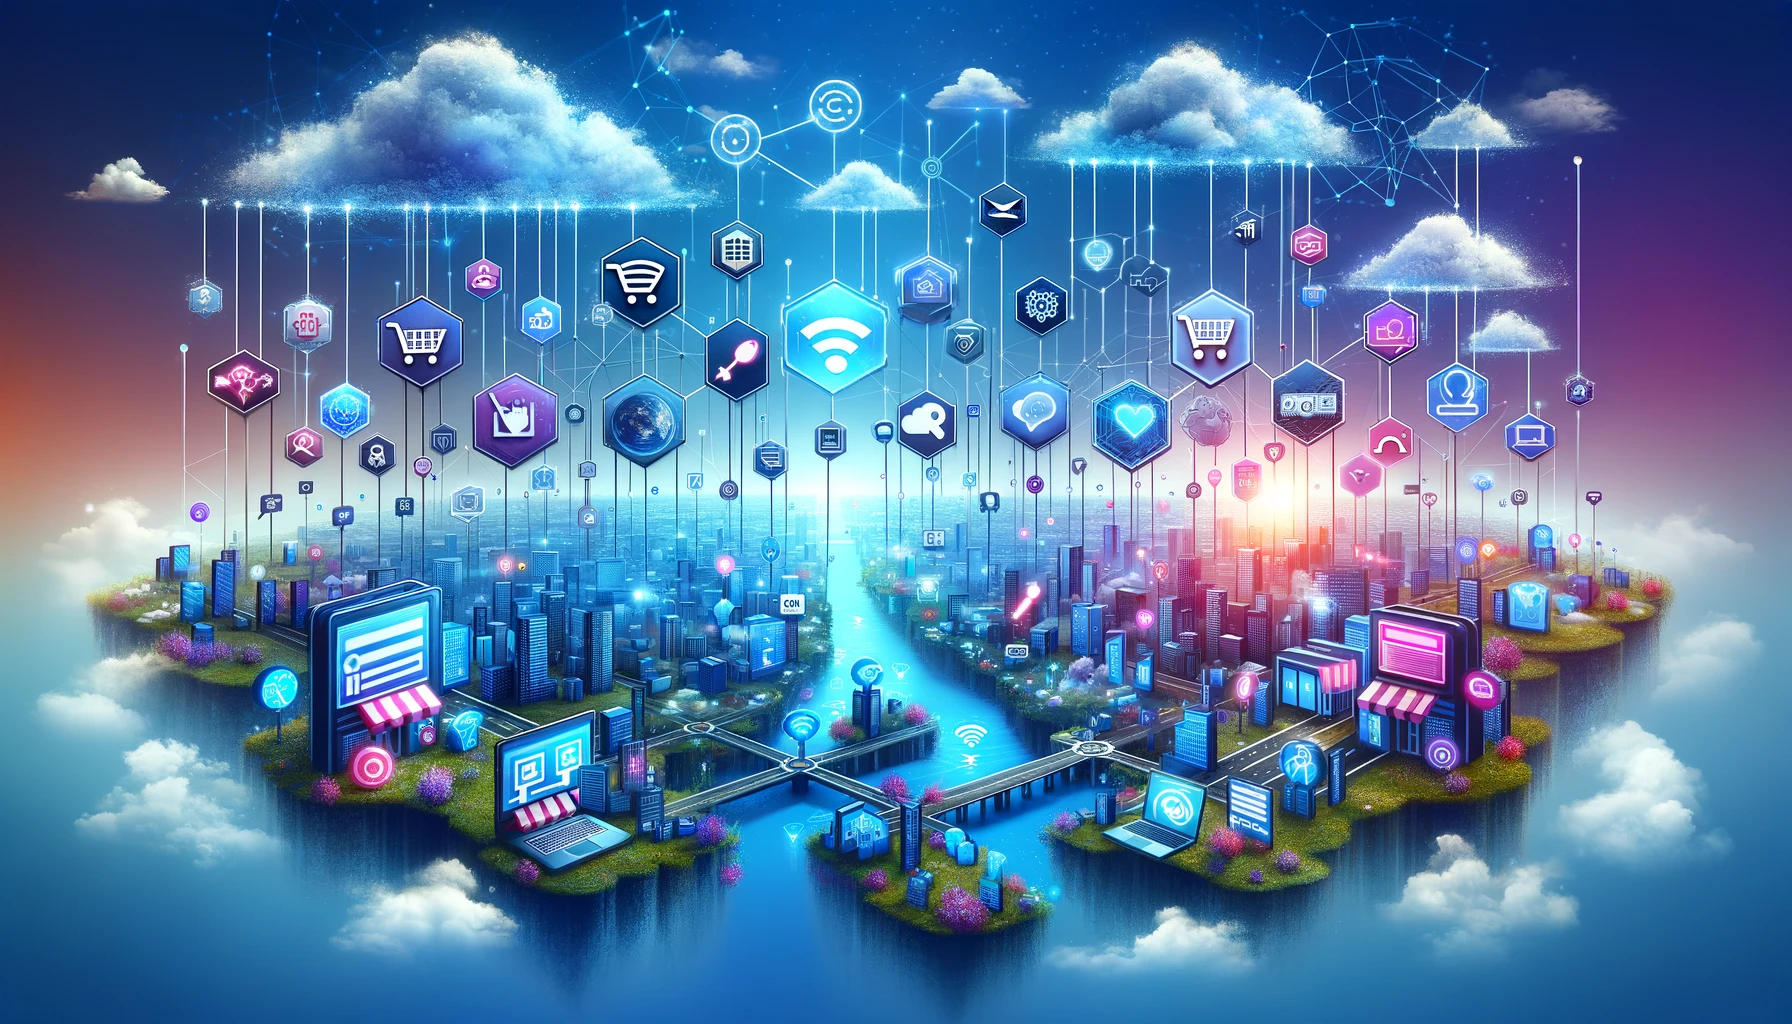 Image showcasing the concept of e-commerce link building, with various e-commerce platforms depicted as interconnected floating islands, symbolizing the strategic links between them against a vibrant digital backdrop.